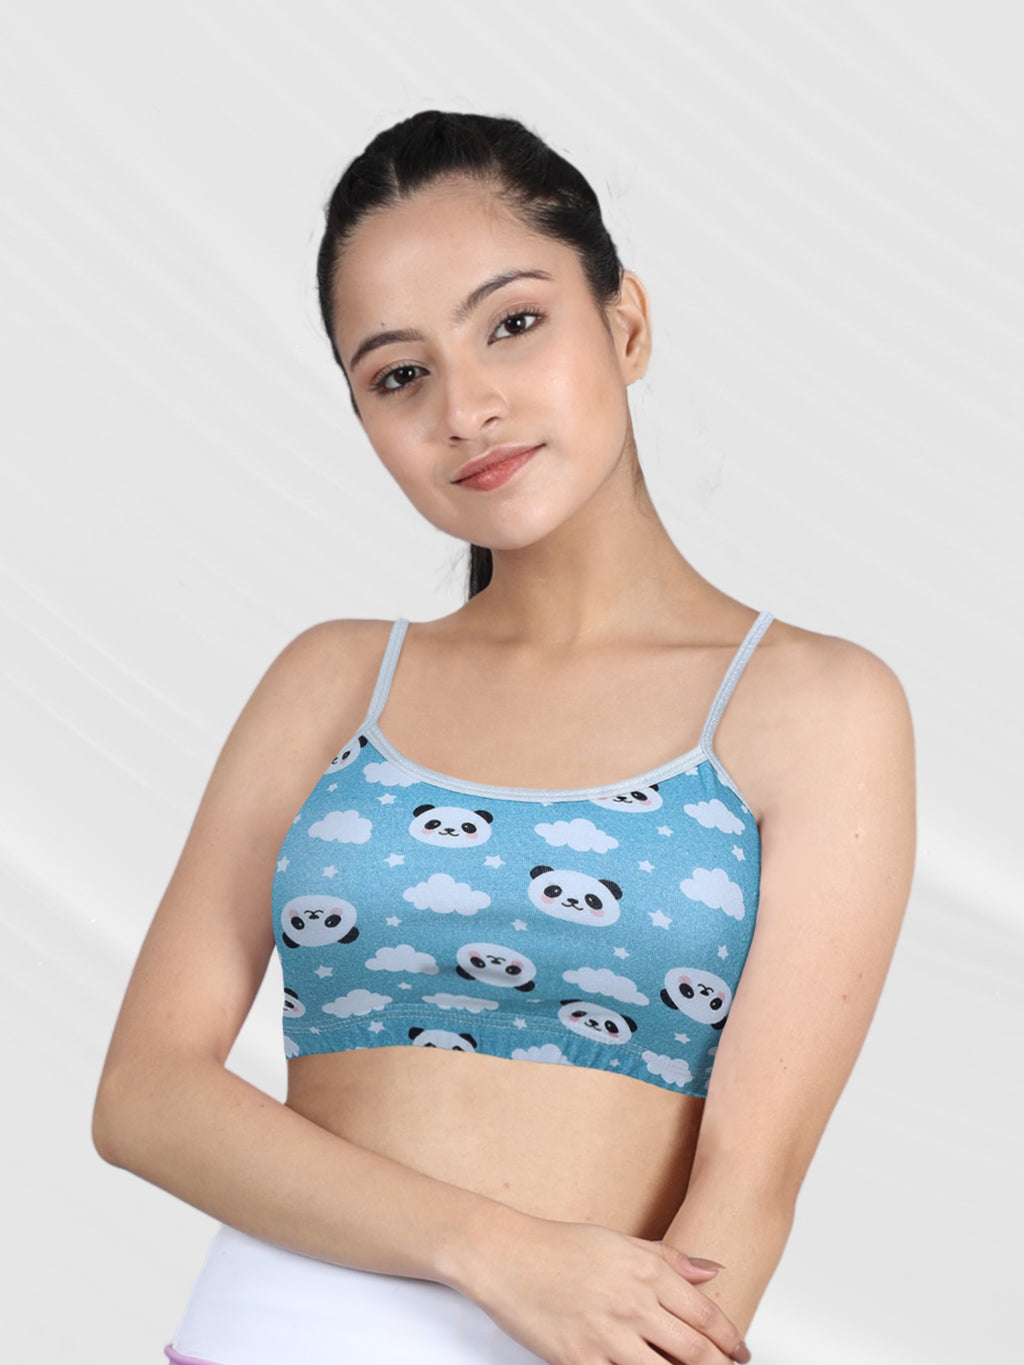 Tink - Best Sports Bra for Girls - Tweens and Teens - Great for a